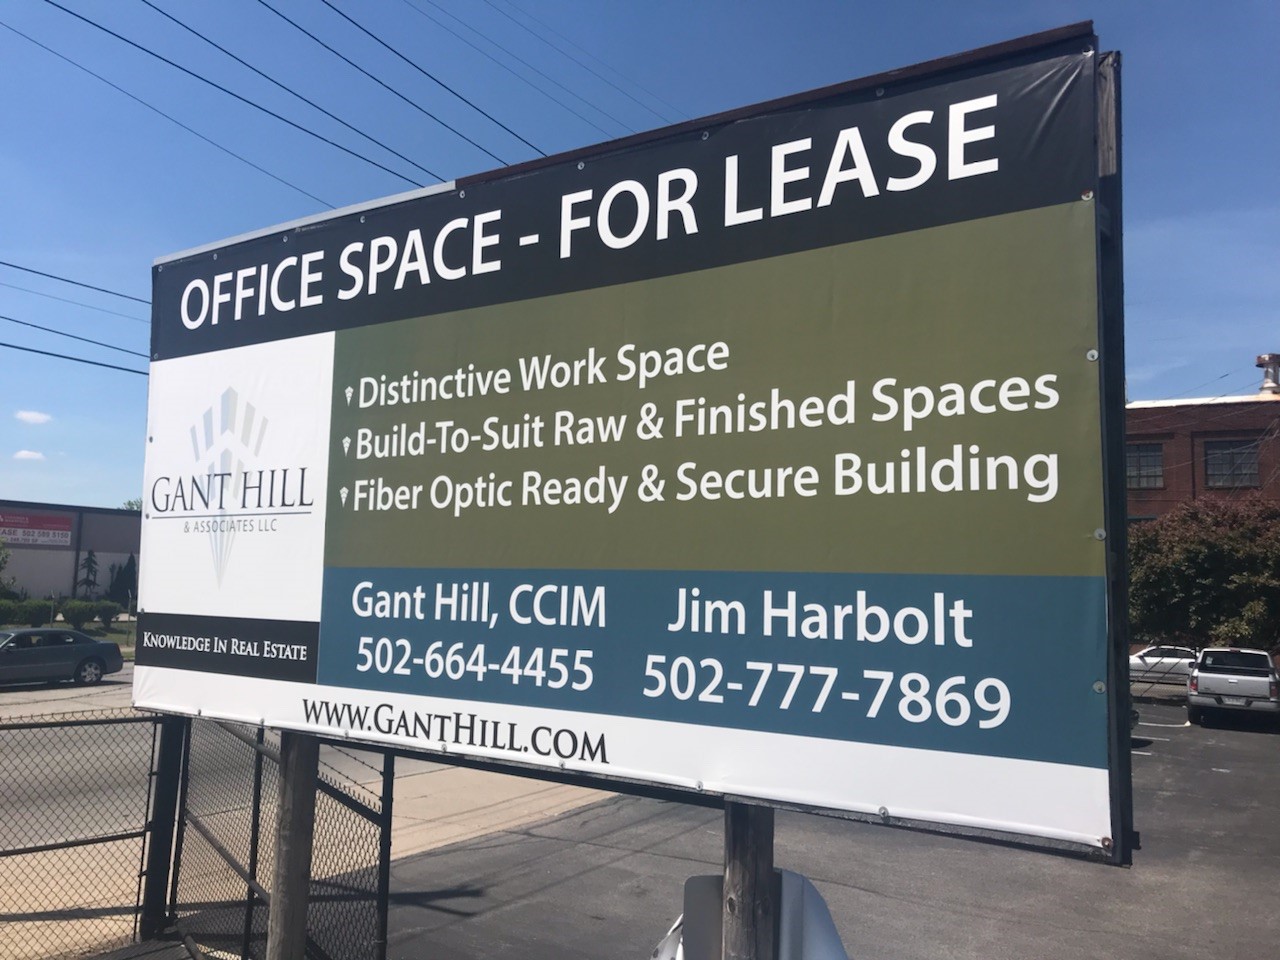 gant hill office space for lease sign